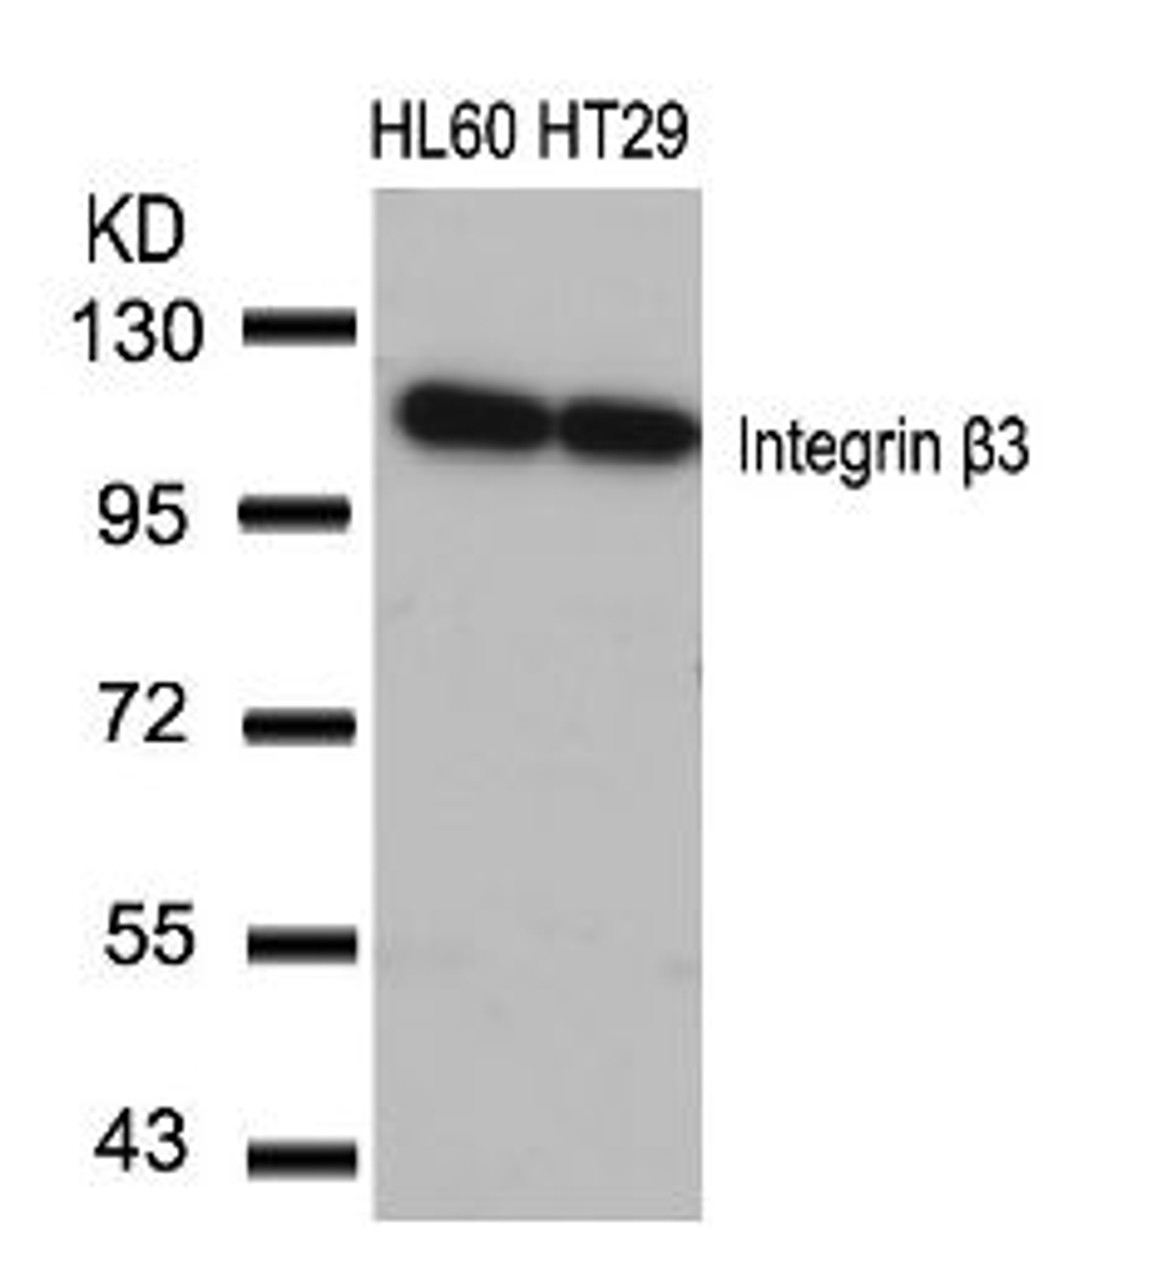 Western blot analysis of lysed extracts from HL60 and HT29 cells using Integrin &#946;3 (Ab-773) .